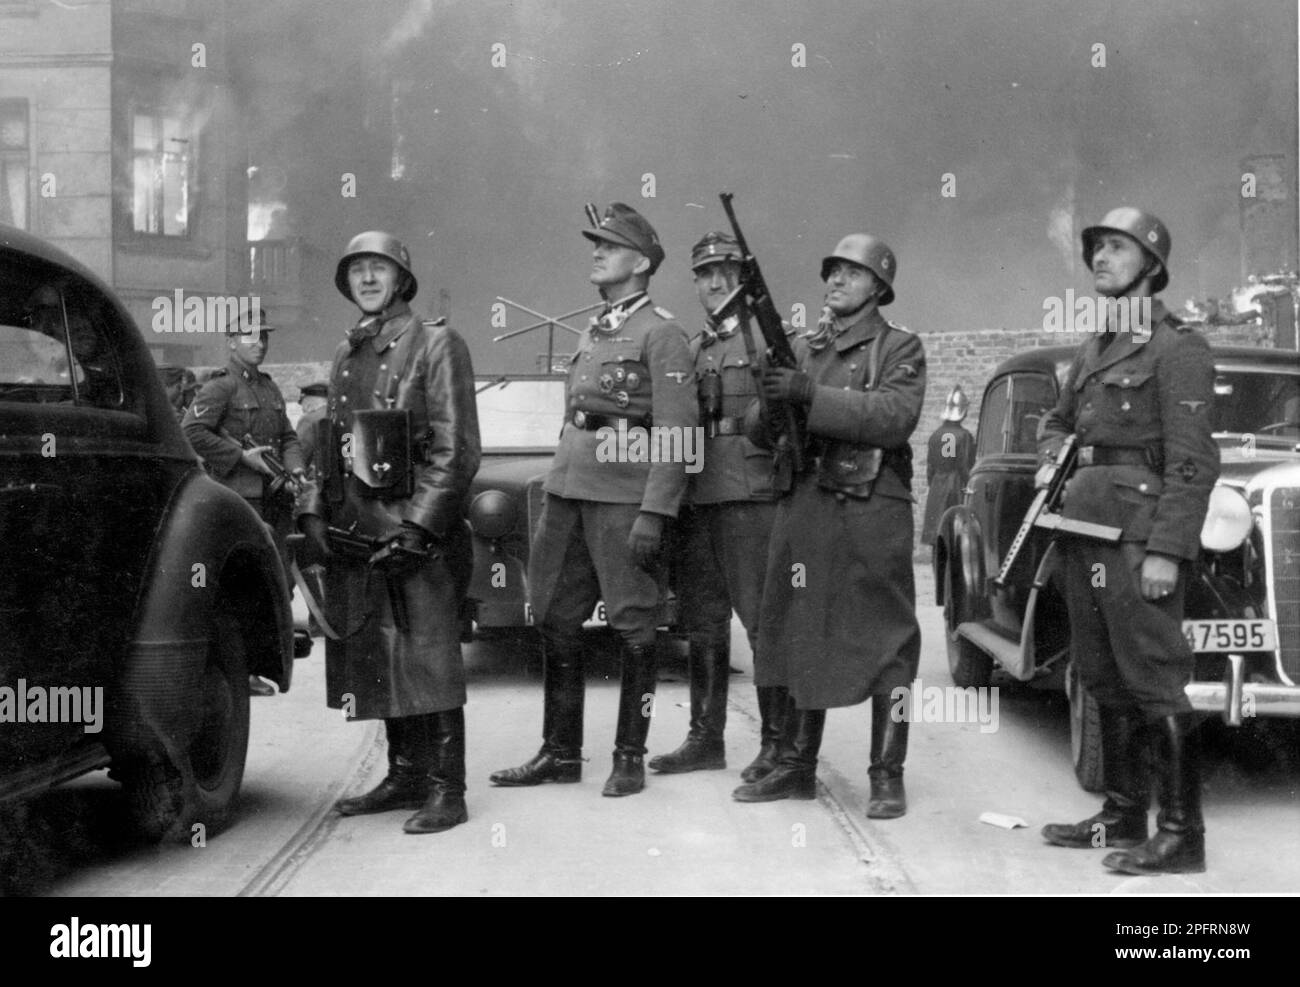 In January 1943 the nazis arrived to round up the Jews of the Warsaw Ghetto  The Jews, resolved to fight it out, took on the SS with homemade and primitive weapons. The defenders were executed or deported and the Ghetto area was systematically demolished. This event is known as The Ghetto Uprising. This image shows SS leader Jurgen Stroop (centre, peaked cap) observing and guiding the action.  This image is from the German photographic record of the event, known as the Stroop report. Stroop was hanged in 1952 for these events. Stock Photo